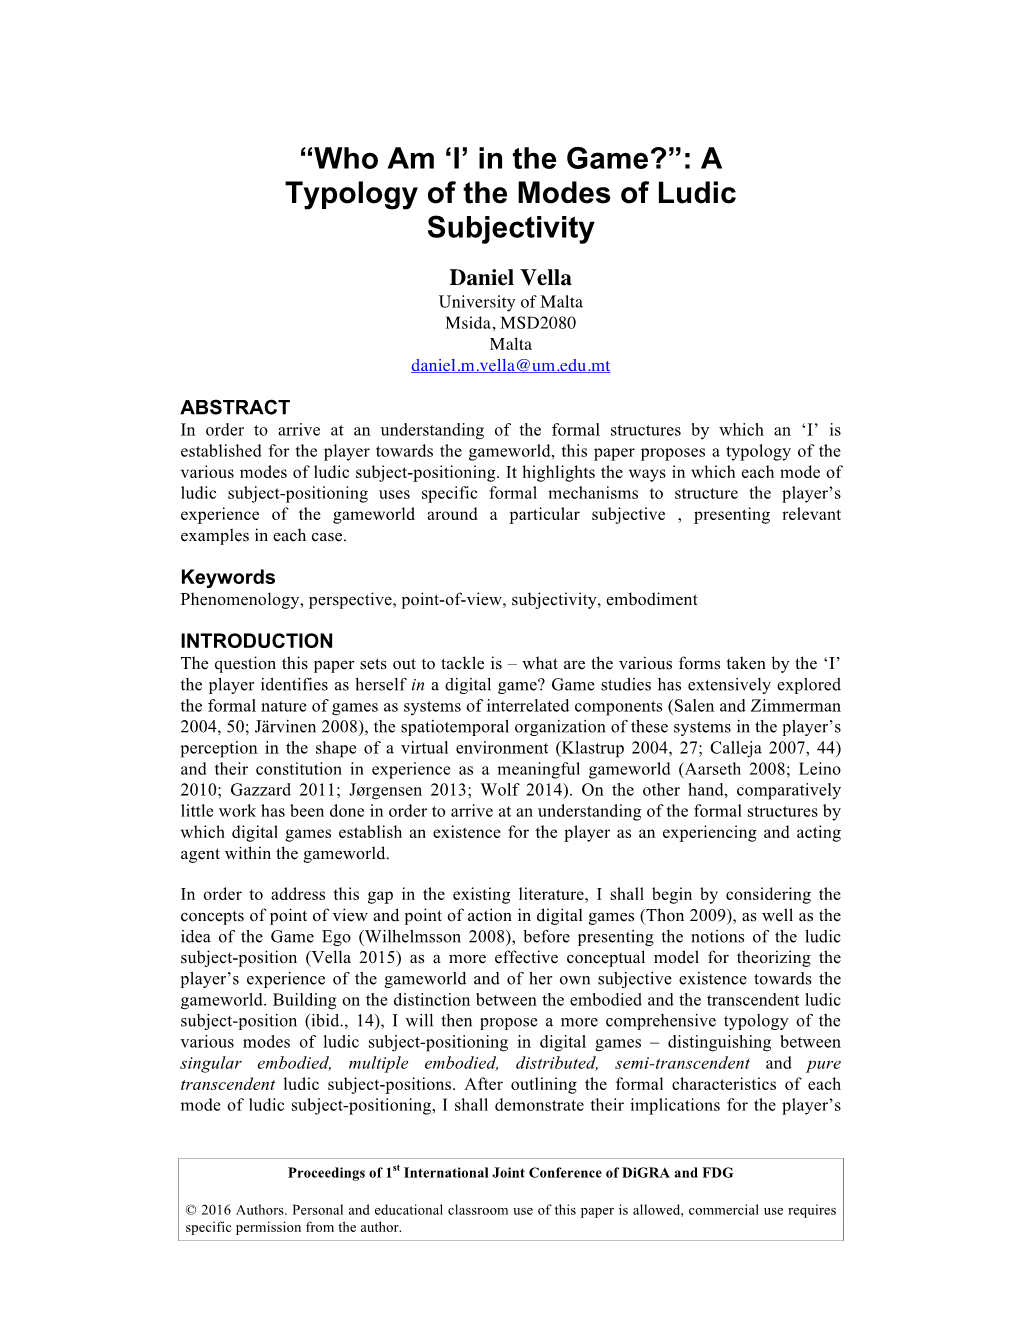 A Typology of the Modes of Ludic Subjectivity